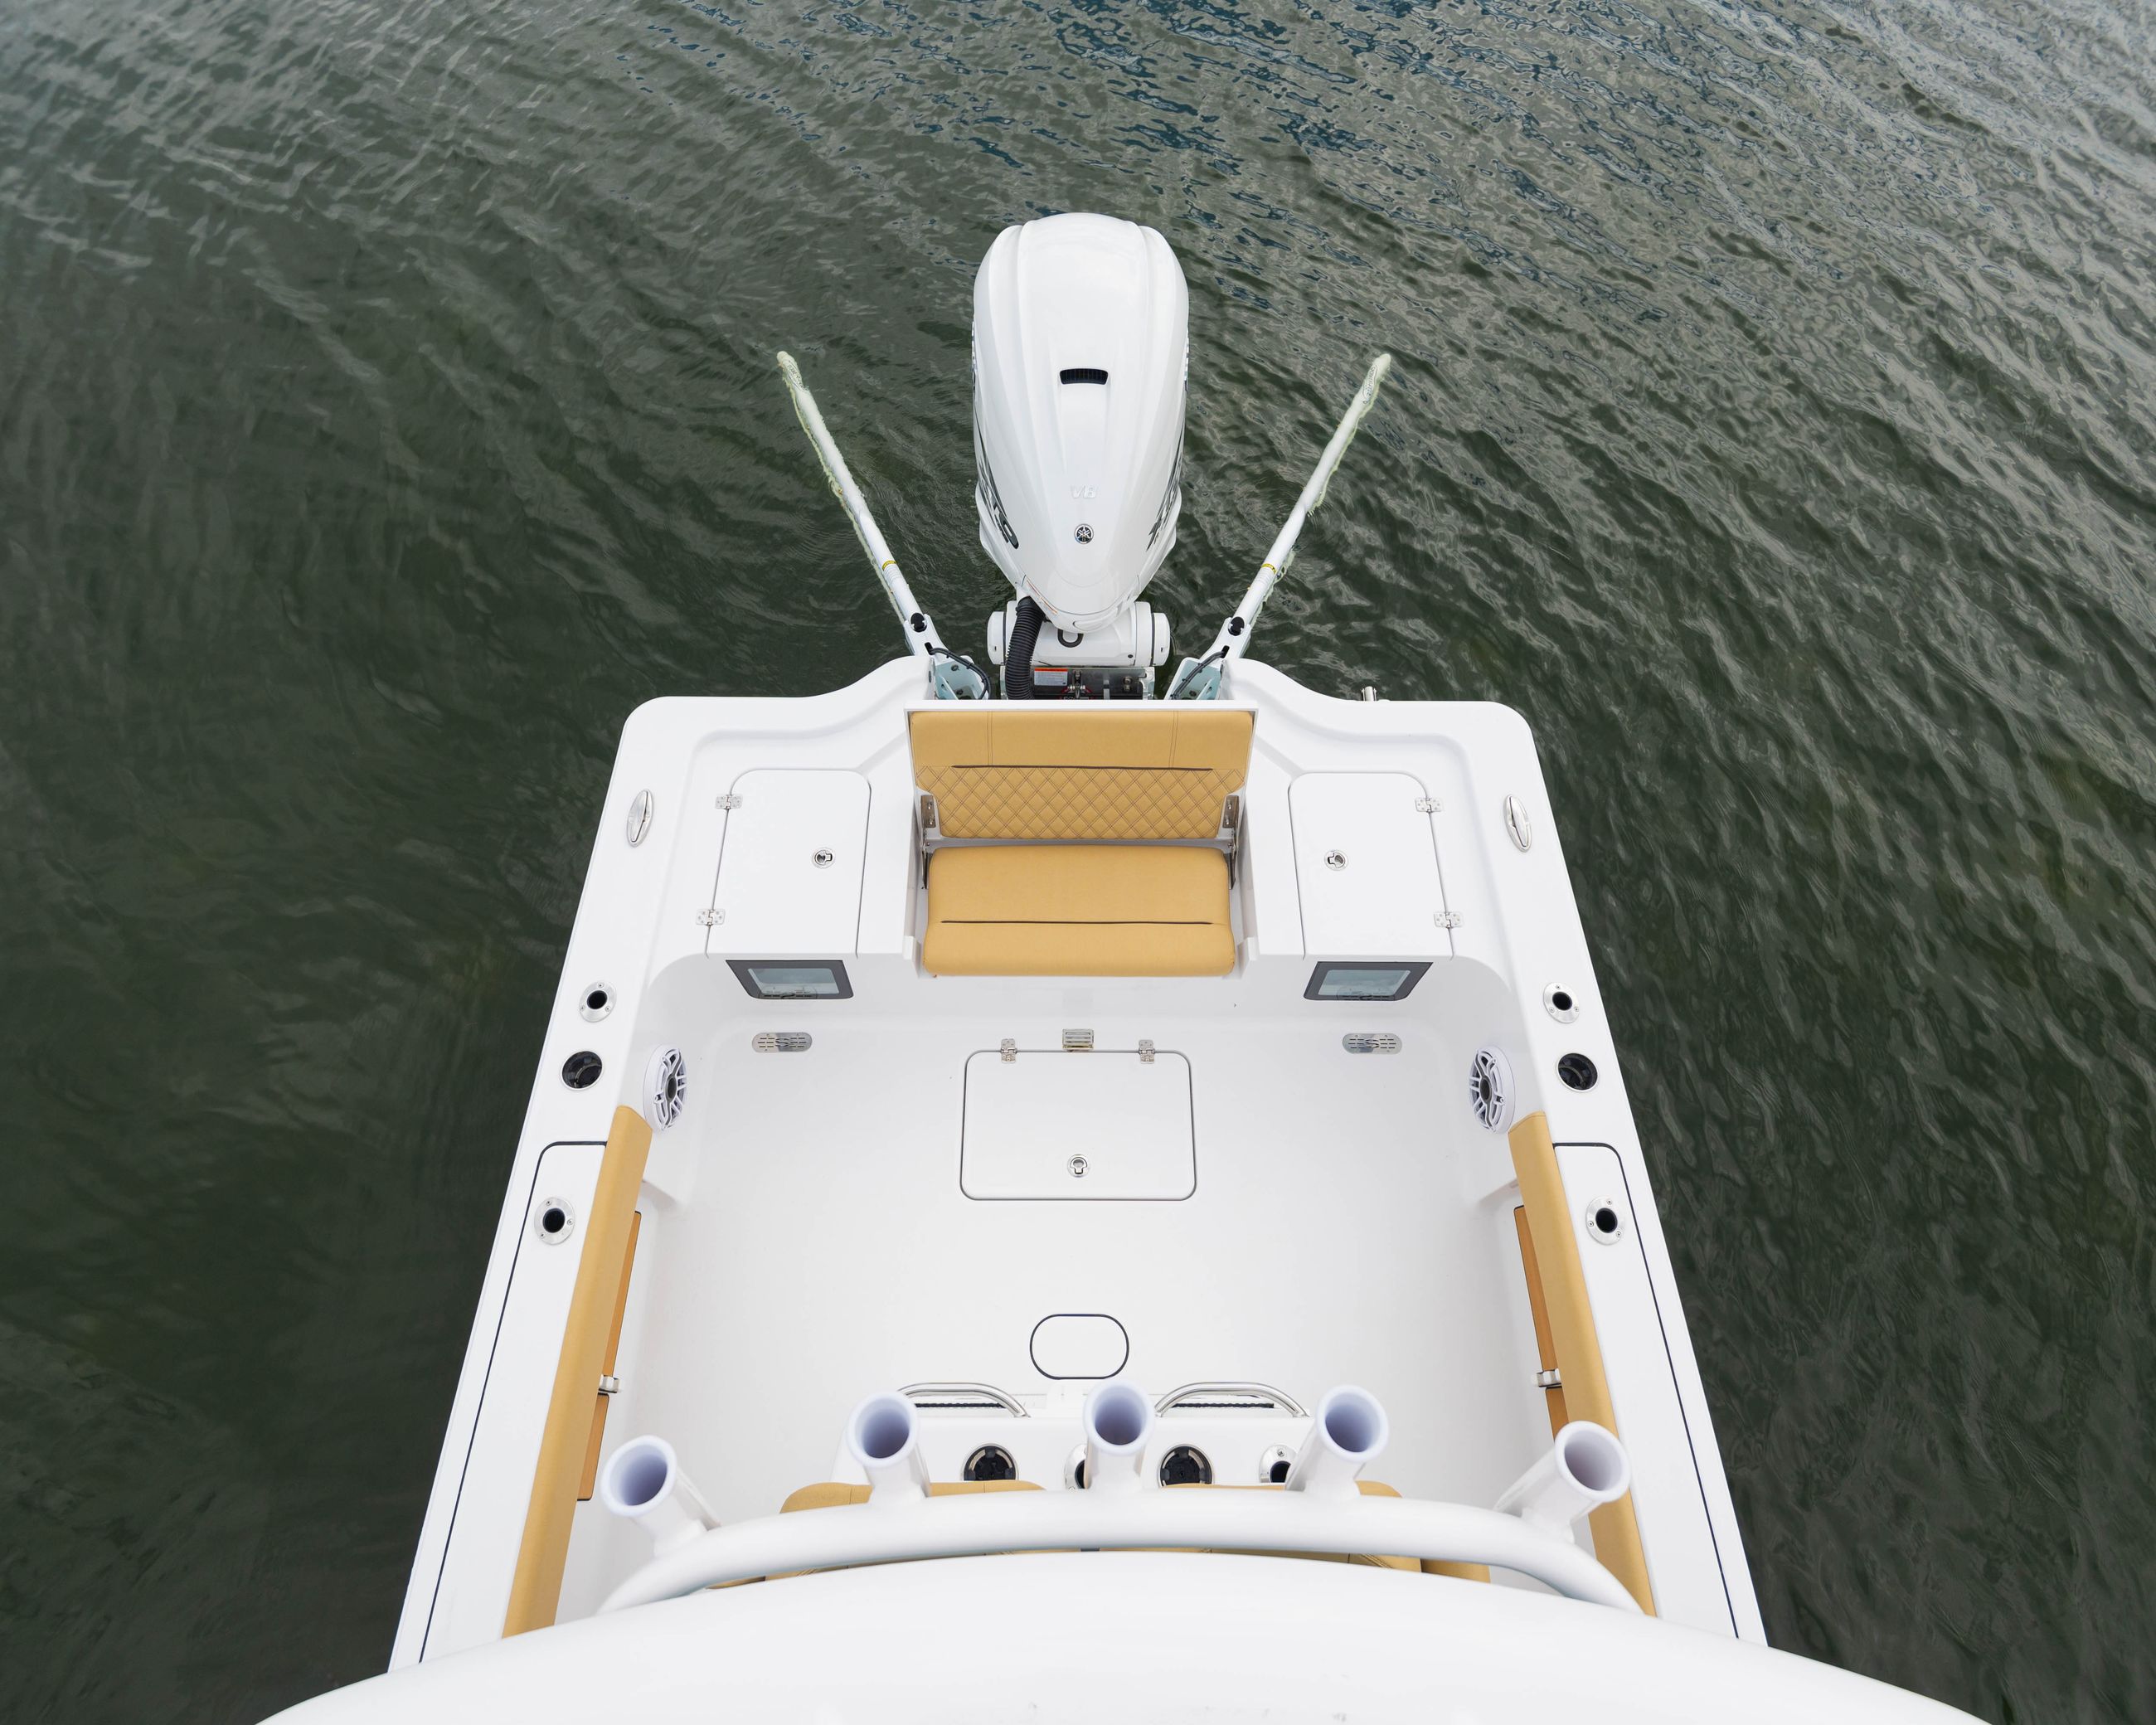 Detail image of the Masters 267OE Bay Boat